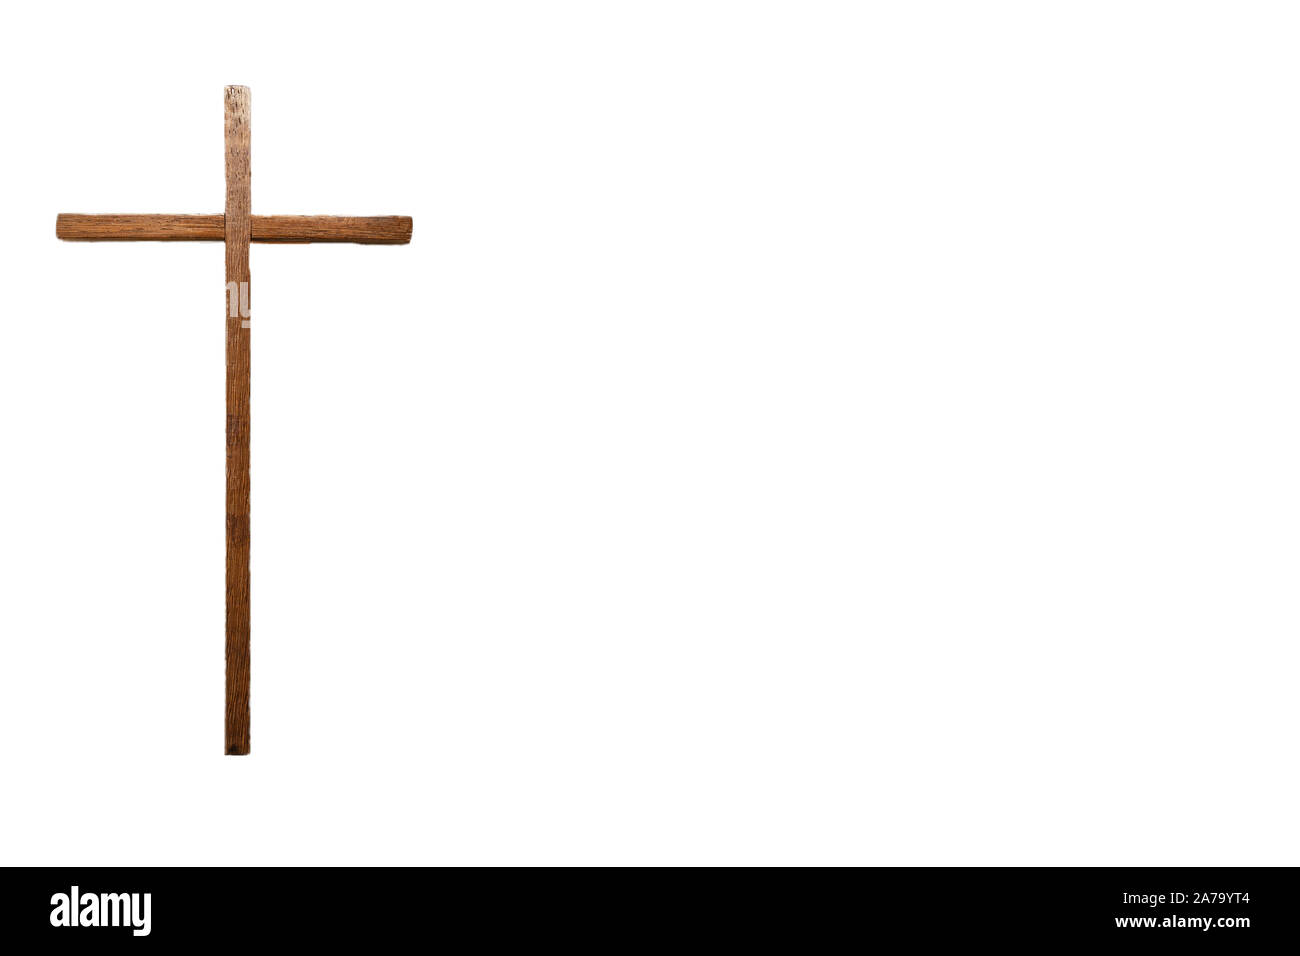 Wooden cross Jesus christ religious and spiritual background concept isolated on white, space for text Stock Photo